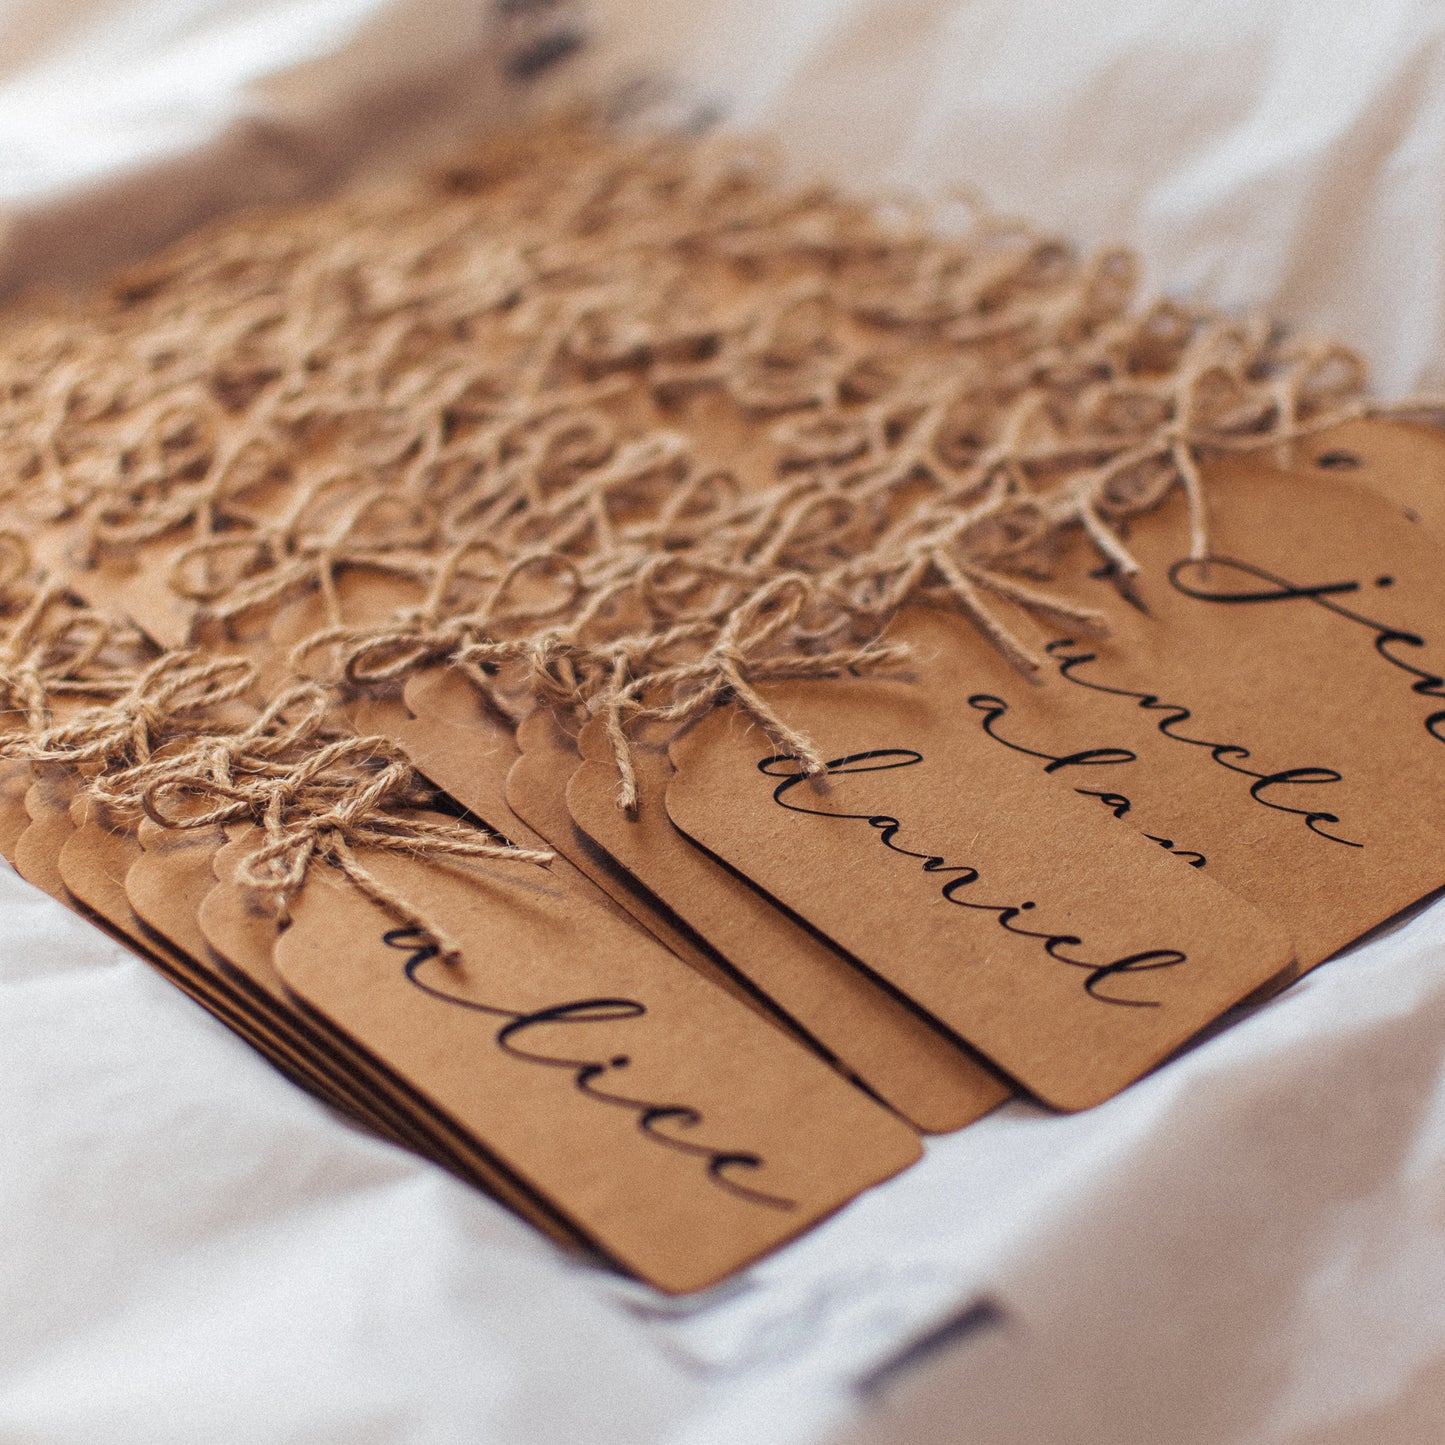 F&B Crafts - Place names for wedding decorations - kraft and twine design in darloune font